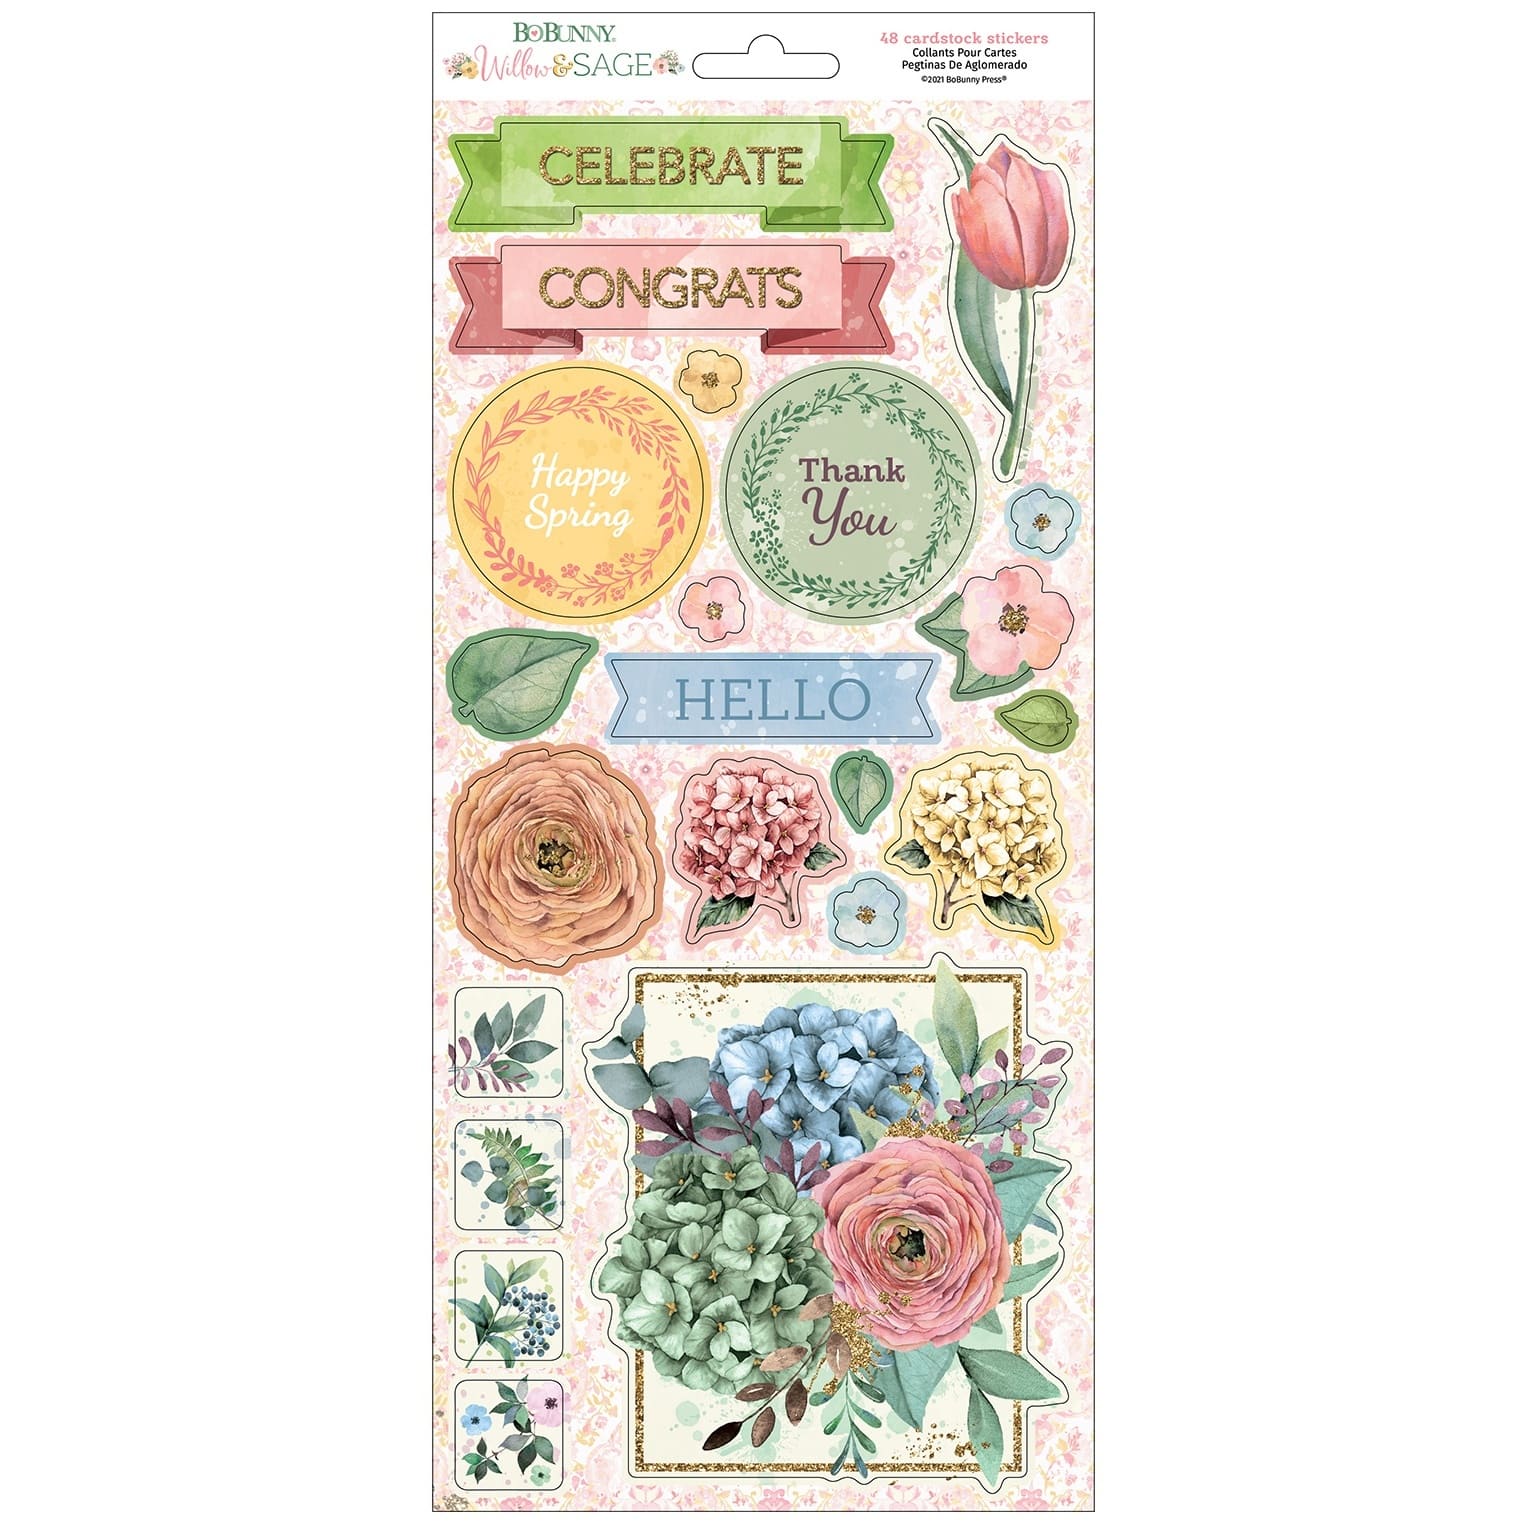 American Crafts&#x2122; Willow &#x26; Sage Cardstock Stickers, 48ct.